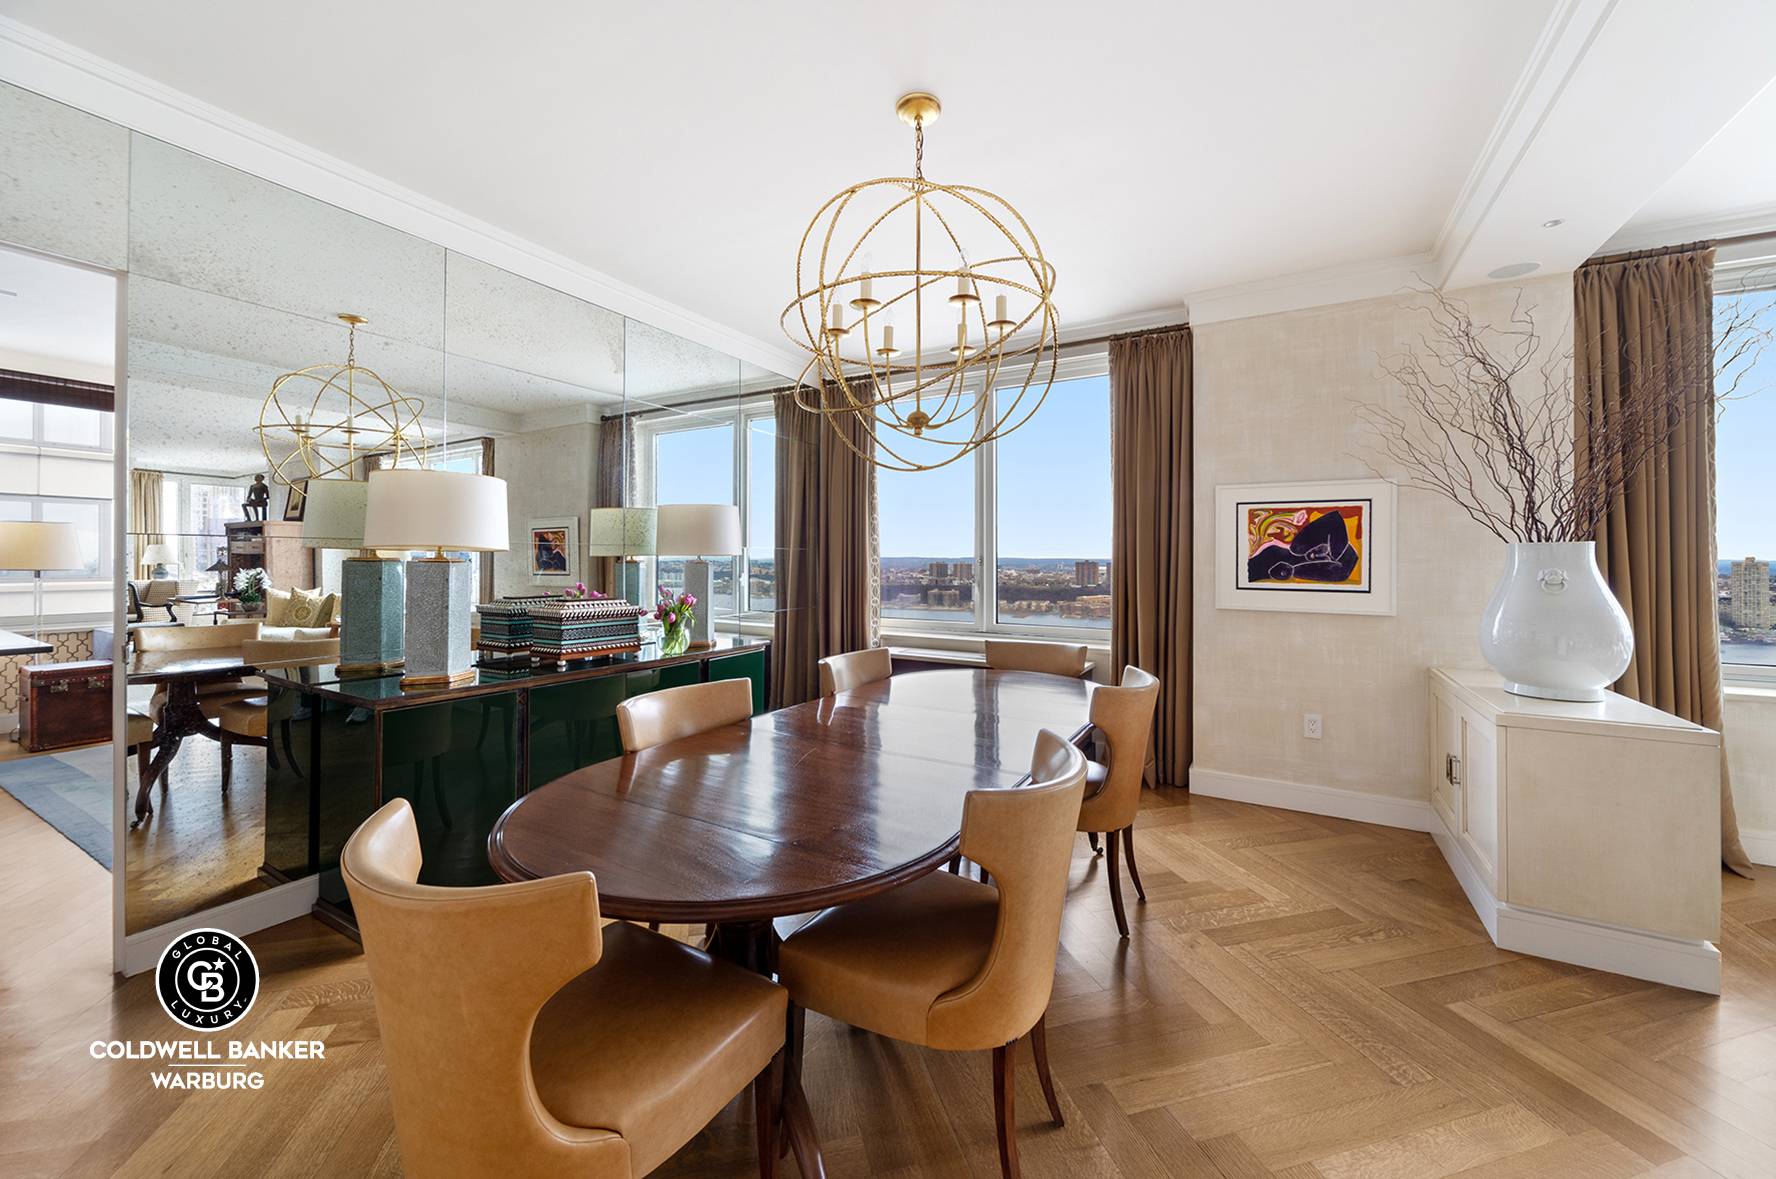 Sunrise and Sunset ! Penthouse 1A, nestled on the 39th floor of the prestigious Rushmore Condominium, offers unparalleled panoramic vistas of New York City's iconic landmarks.